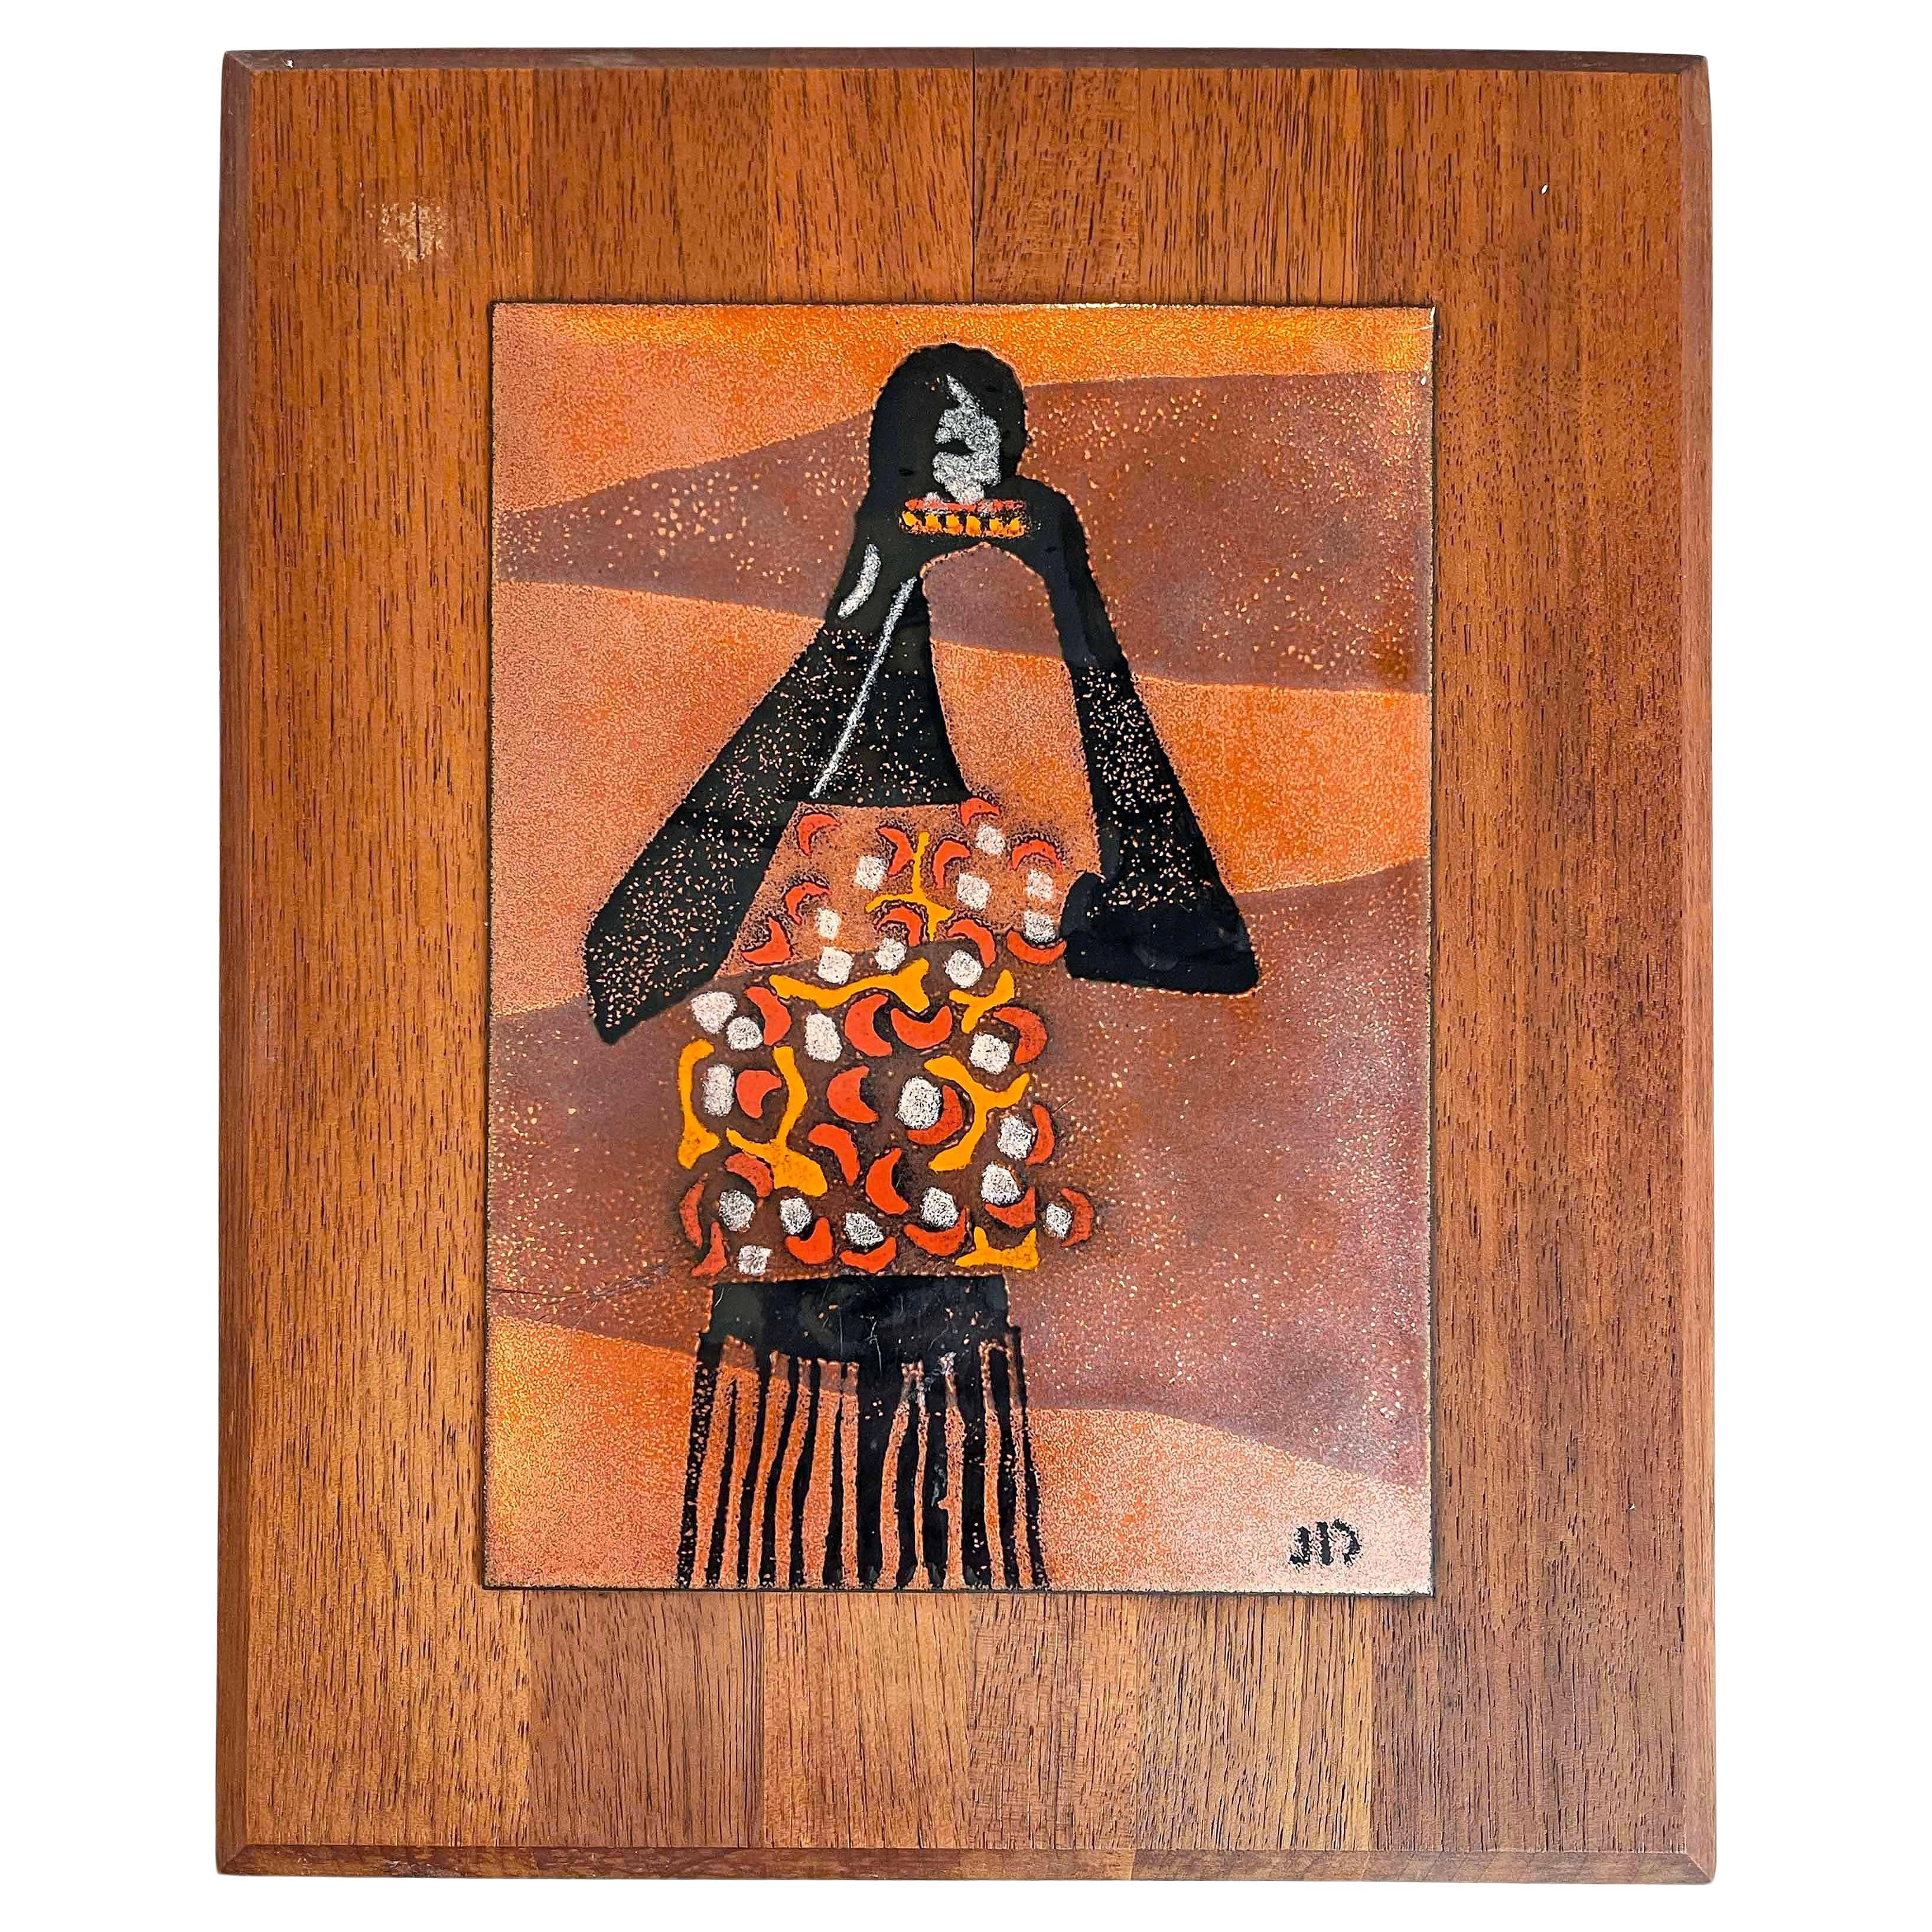 "Playing the Harmonica", Mid Century Enamel Panel of Black Woman in Red & Black